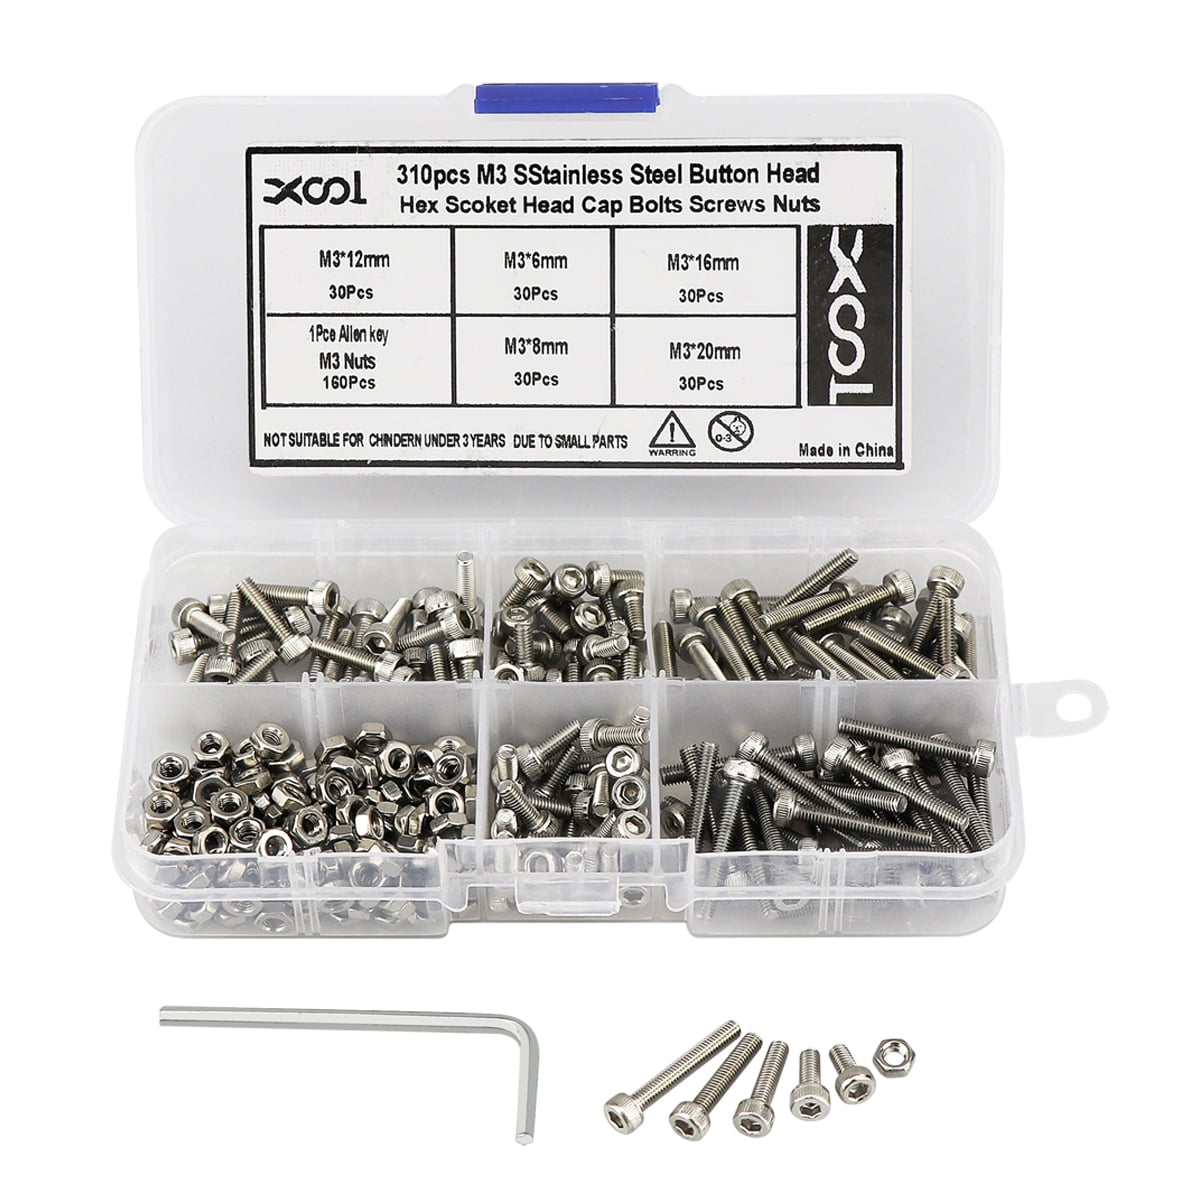 500pcs Set M3 M4 M5 Screw Bolts And Nuts Precise Hex Head Cap Stainless Steel UK 